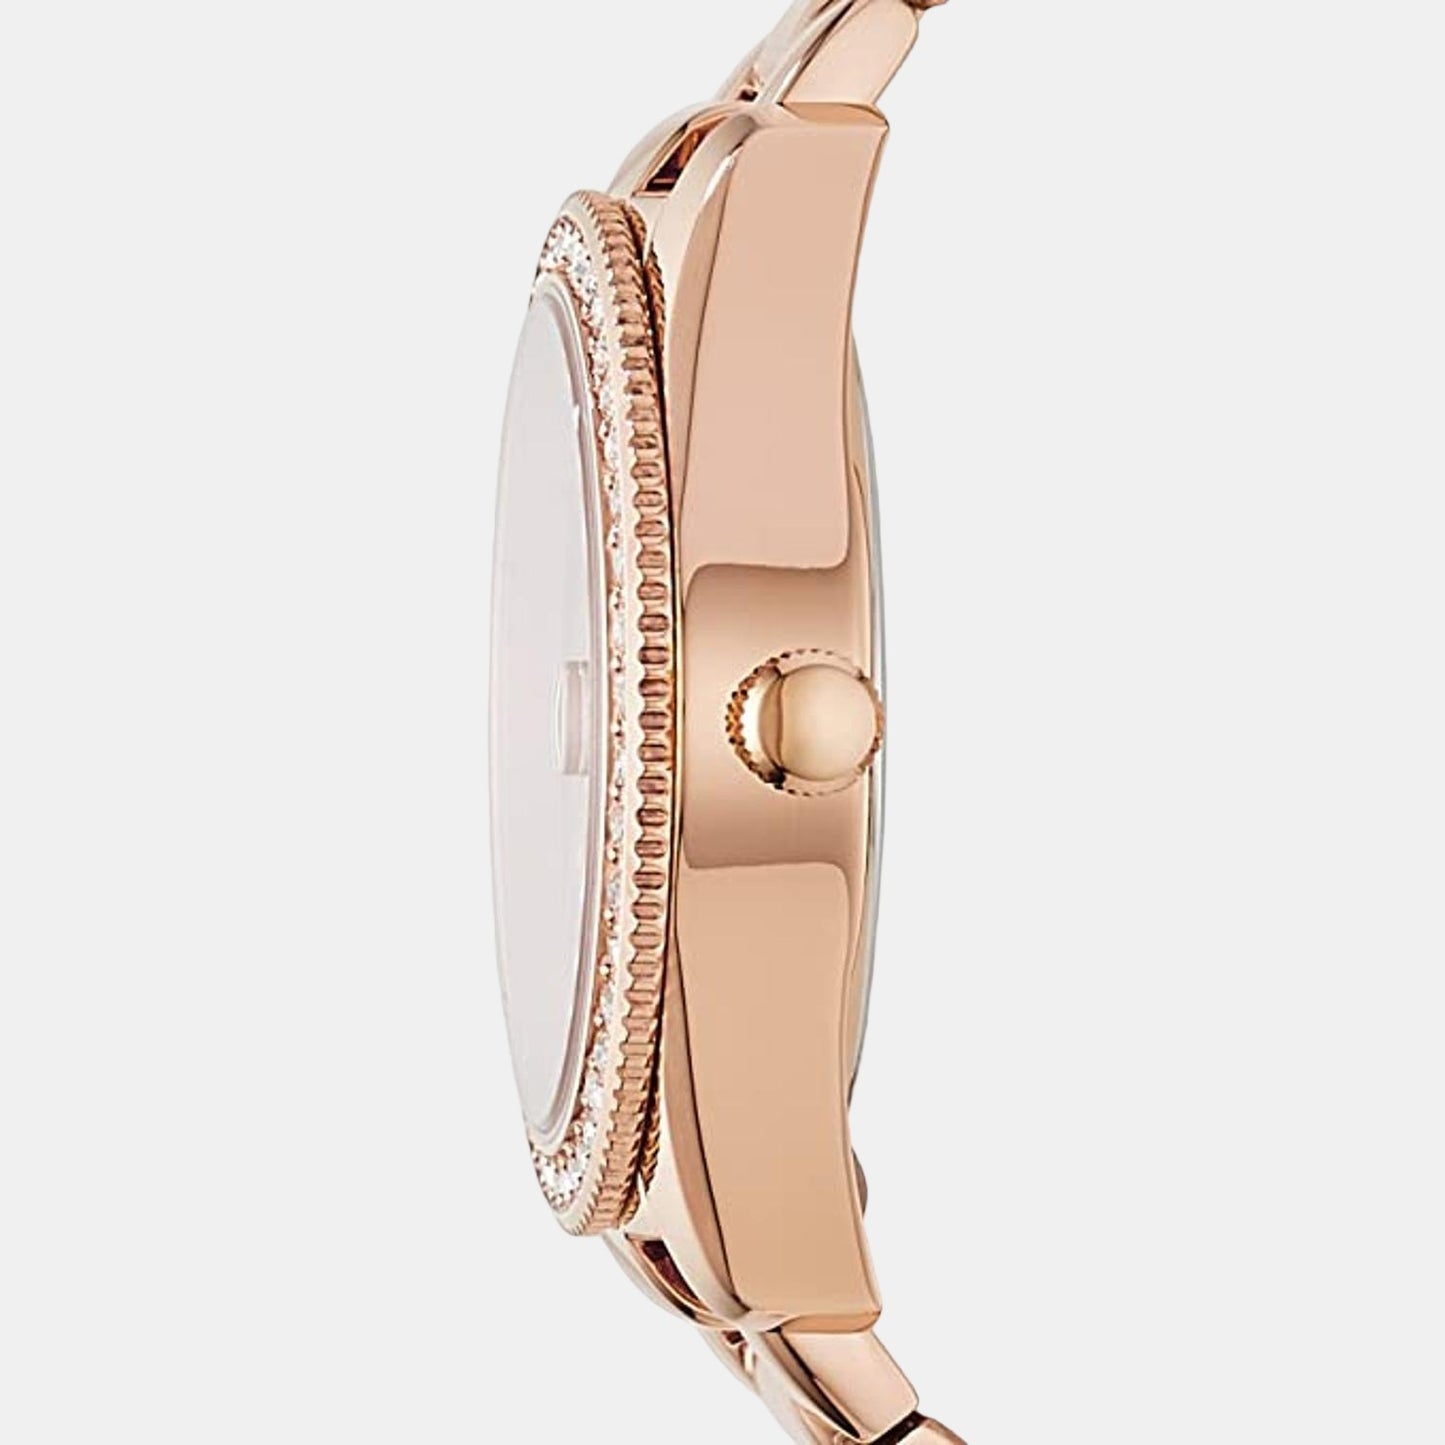 Female Rose Gold Analog Stainless Steel Watch ES4318